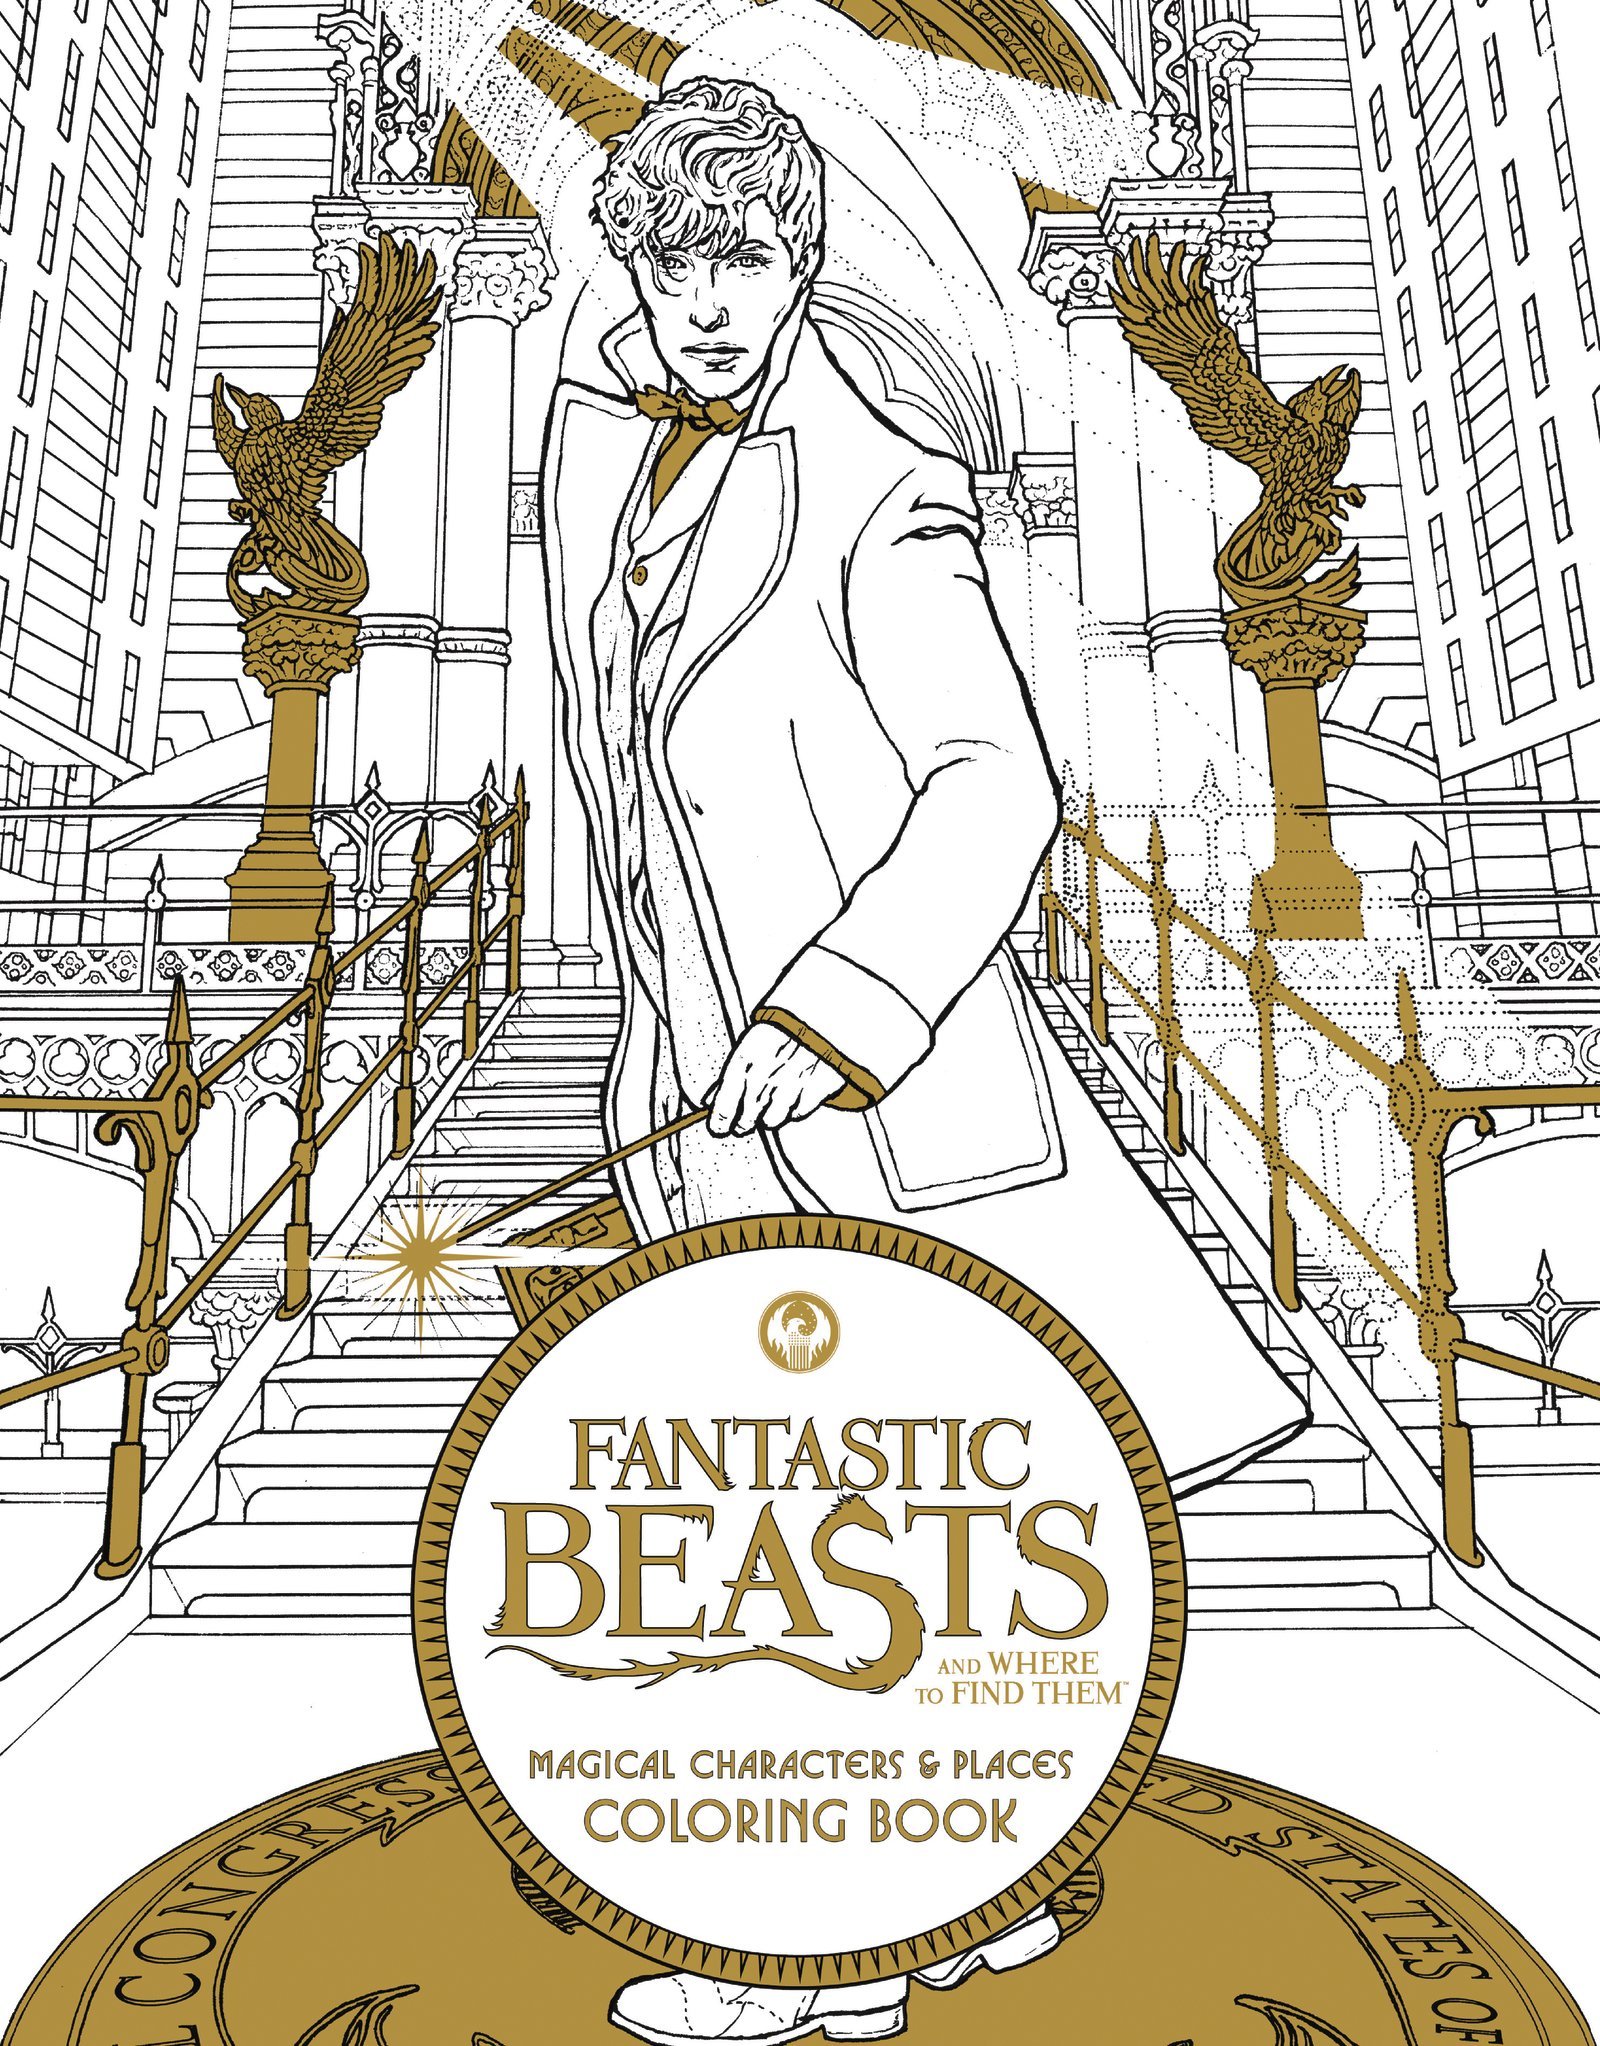 Fantastic Beasts and Where to Find Them |  image4